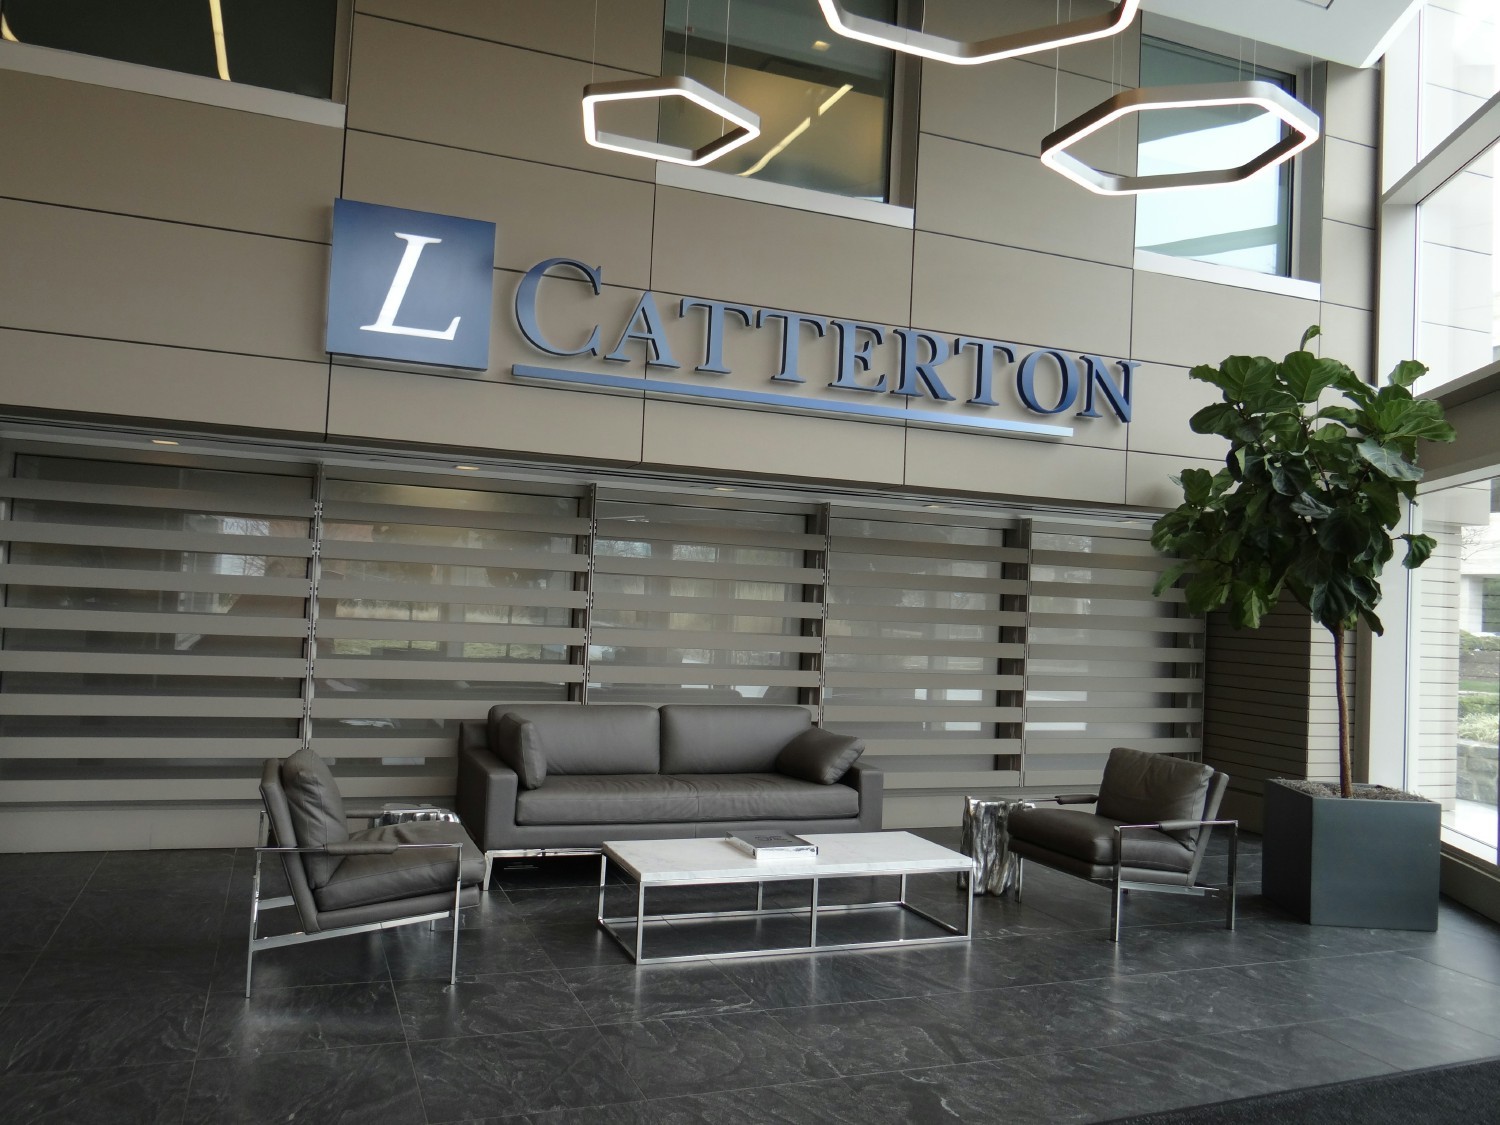 Photo of L Catterton's global headquarters located in
Greenwich, CT.